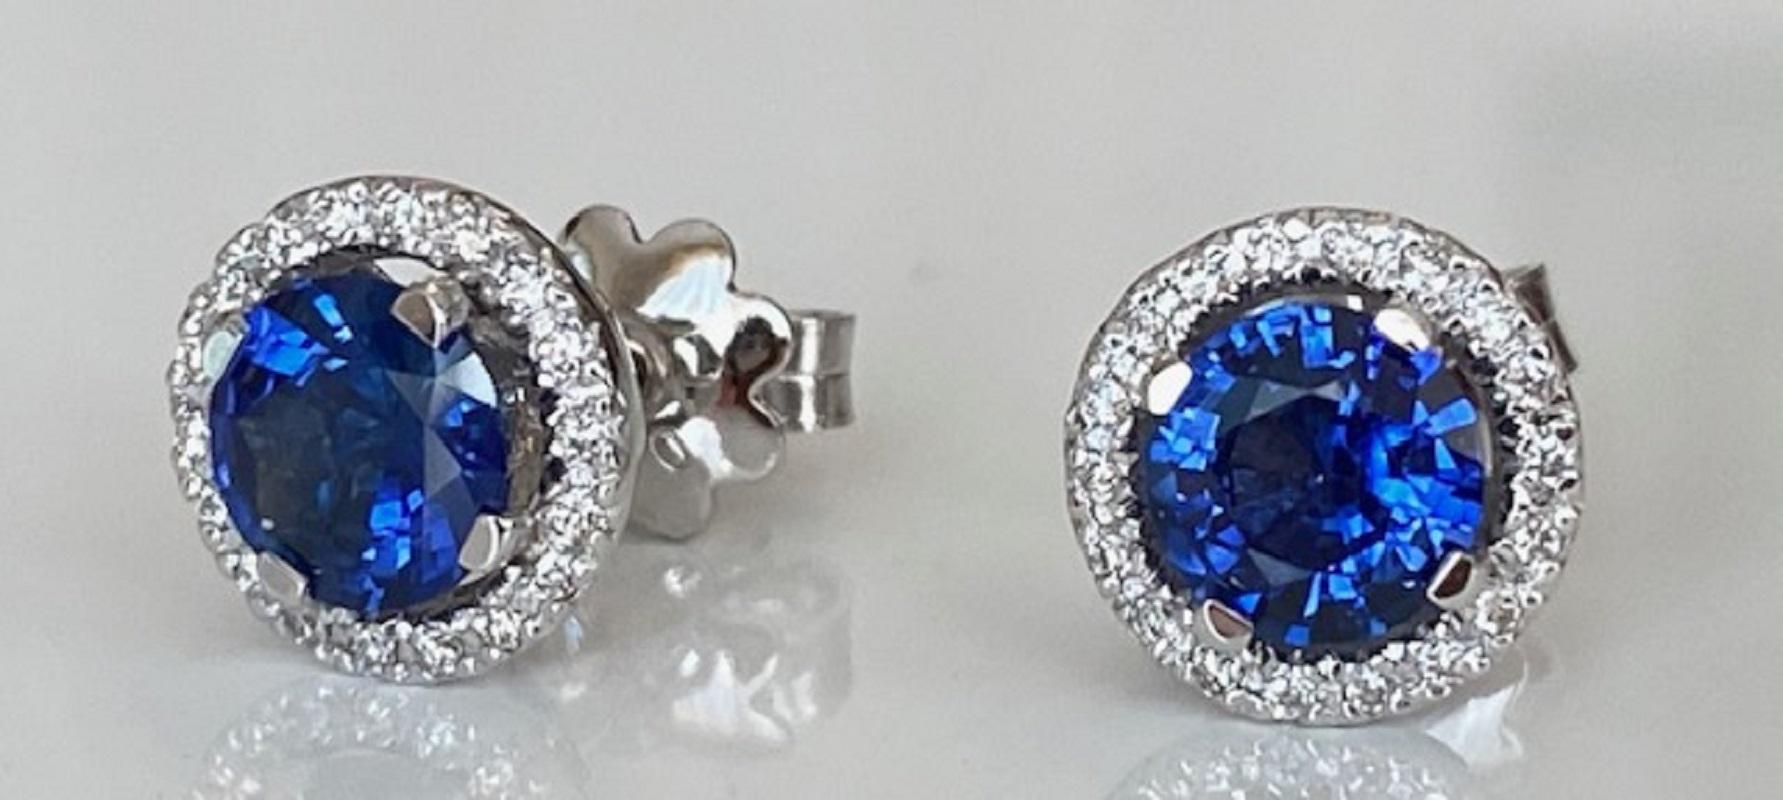 Women's ALGT Certified 18 Kt. White Gold Earrings with 1.62 Ct Sapphires and Diamonds For Sale